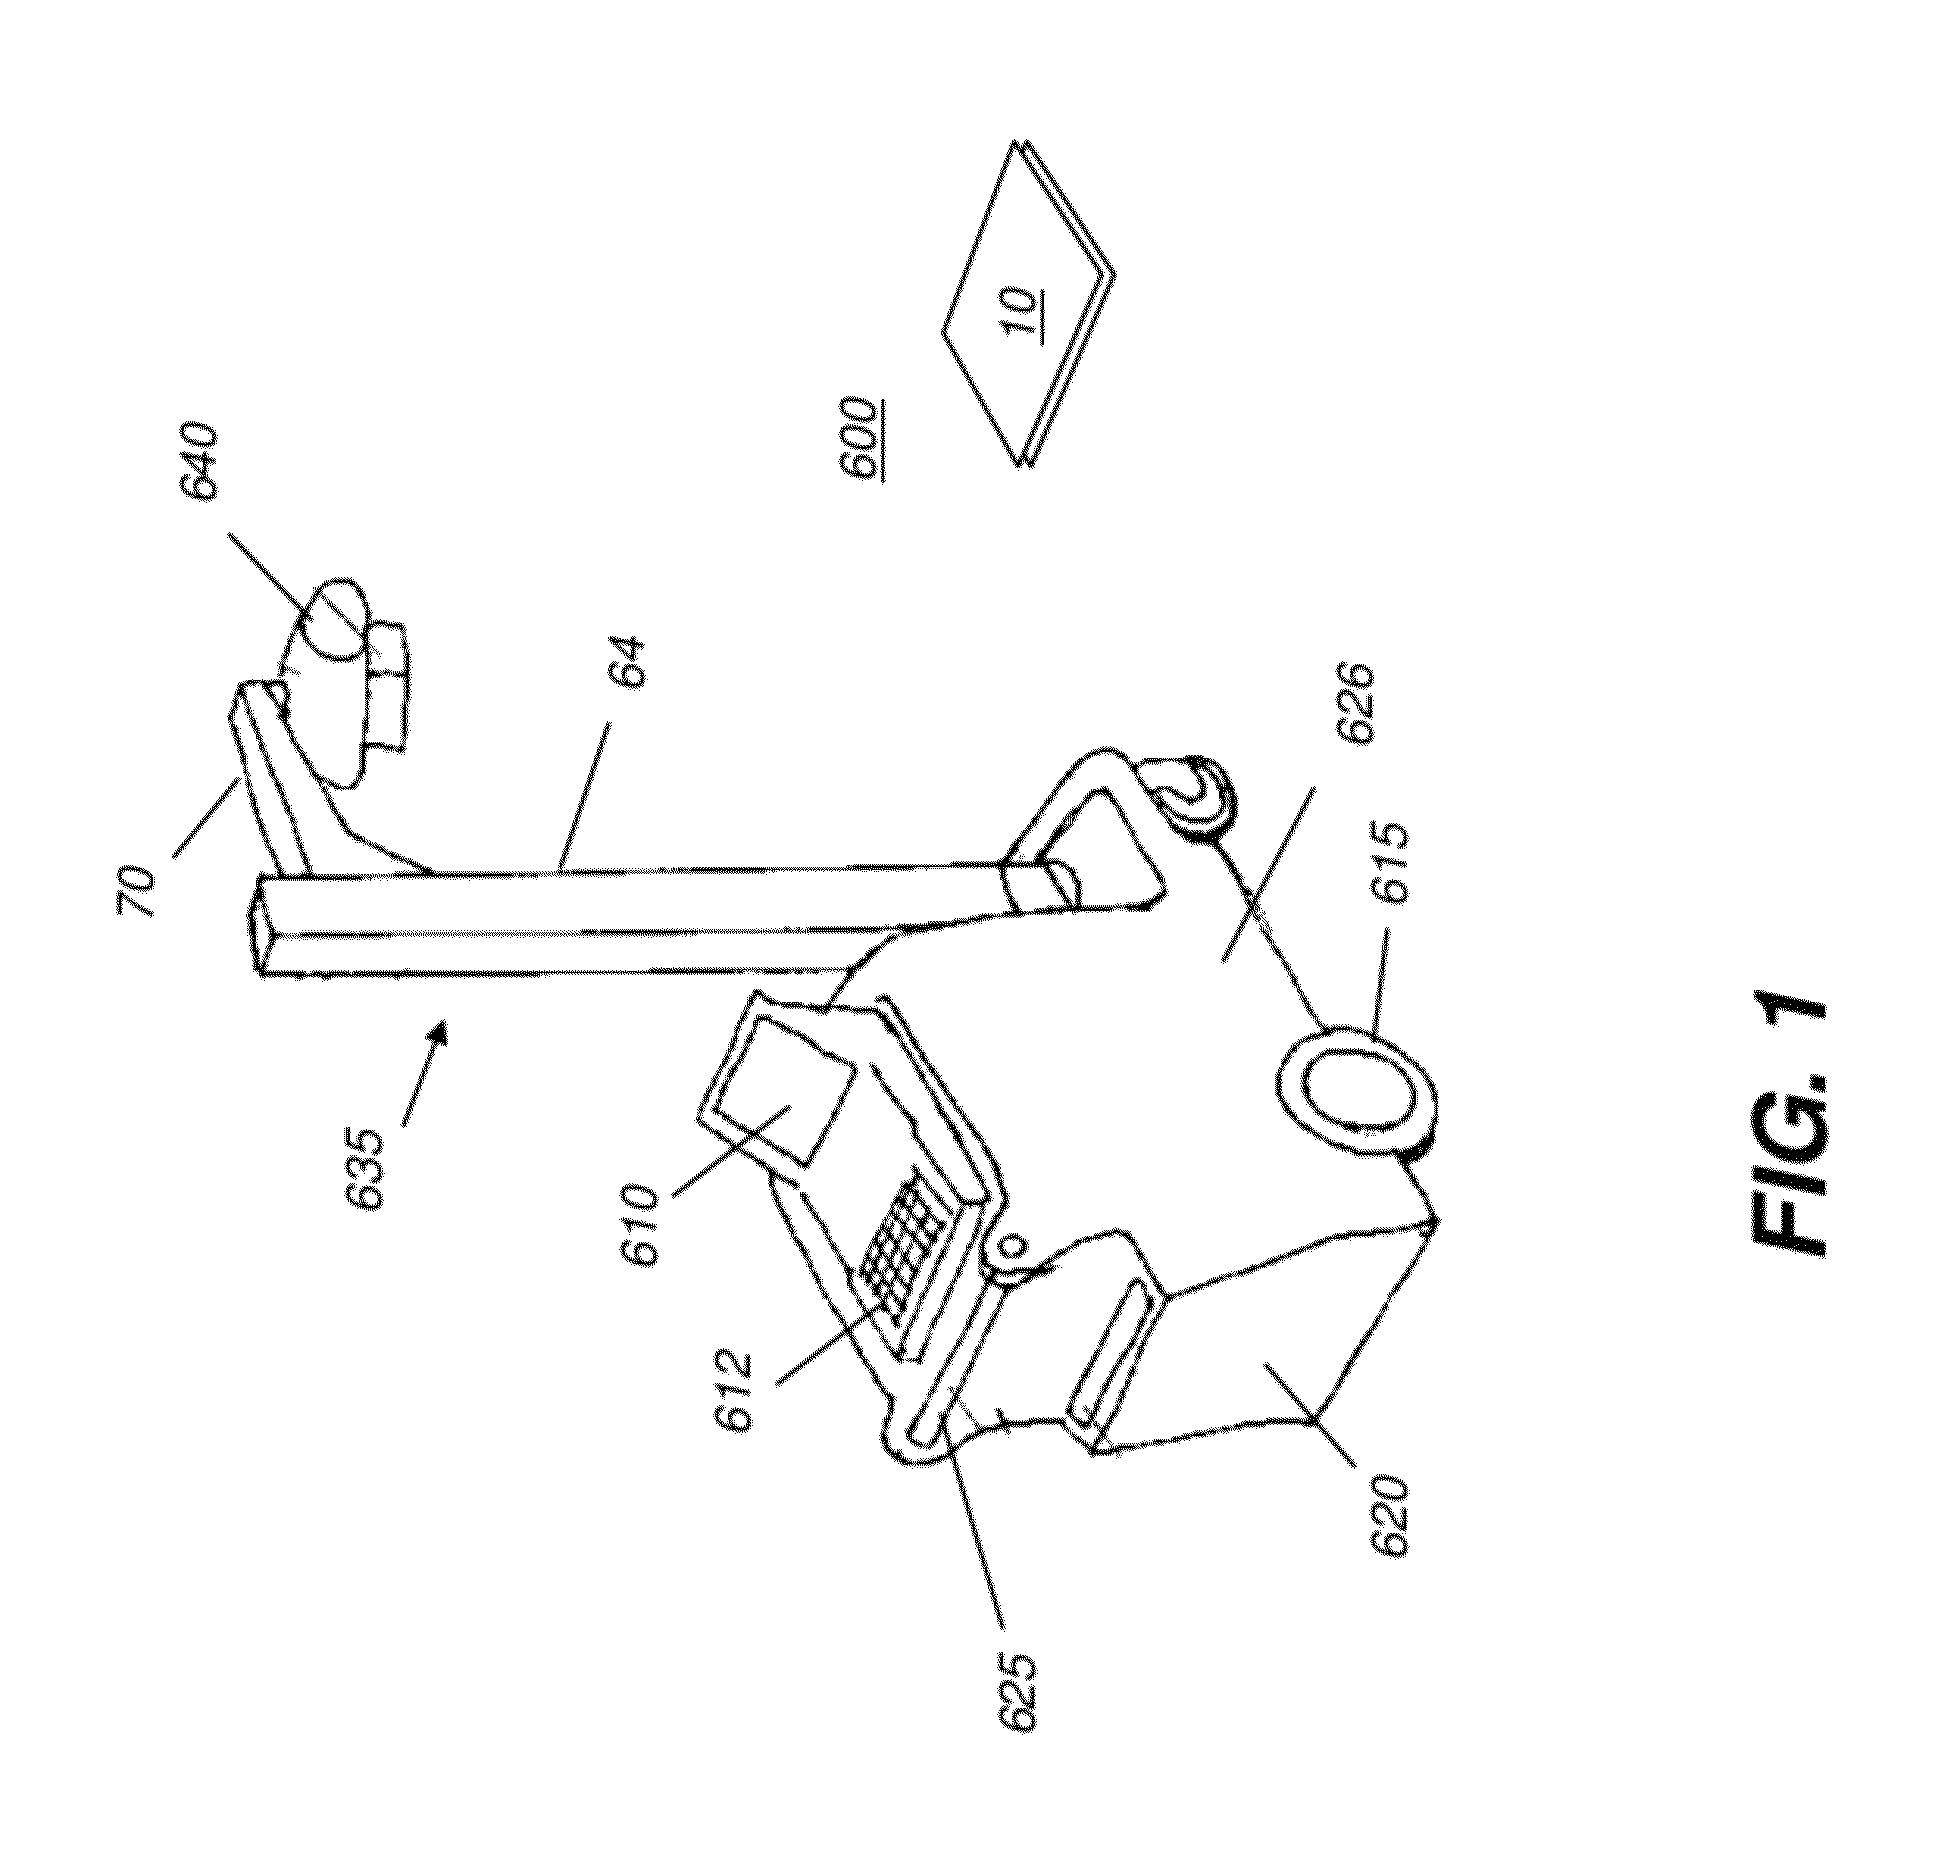 Alignment apparatus for X-ray imaging system